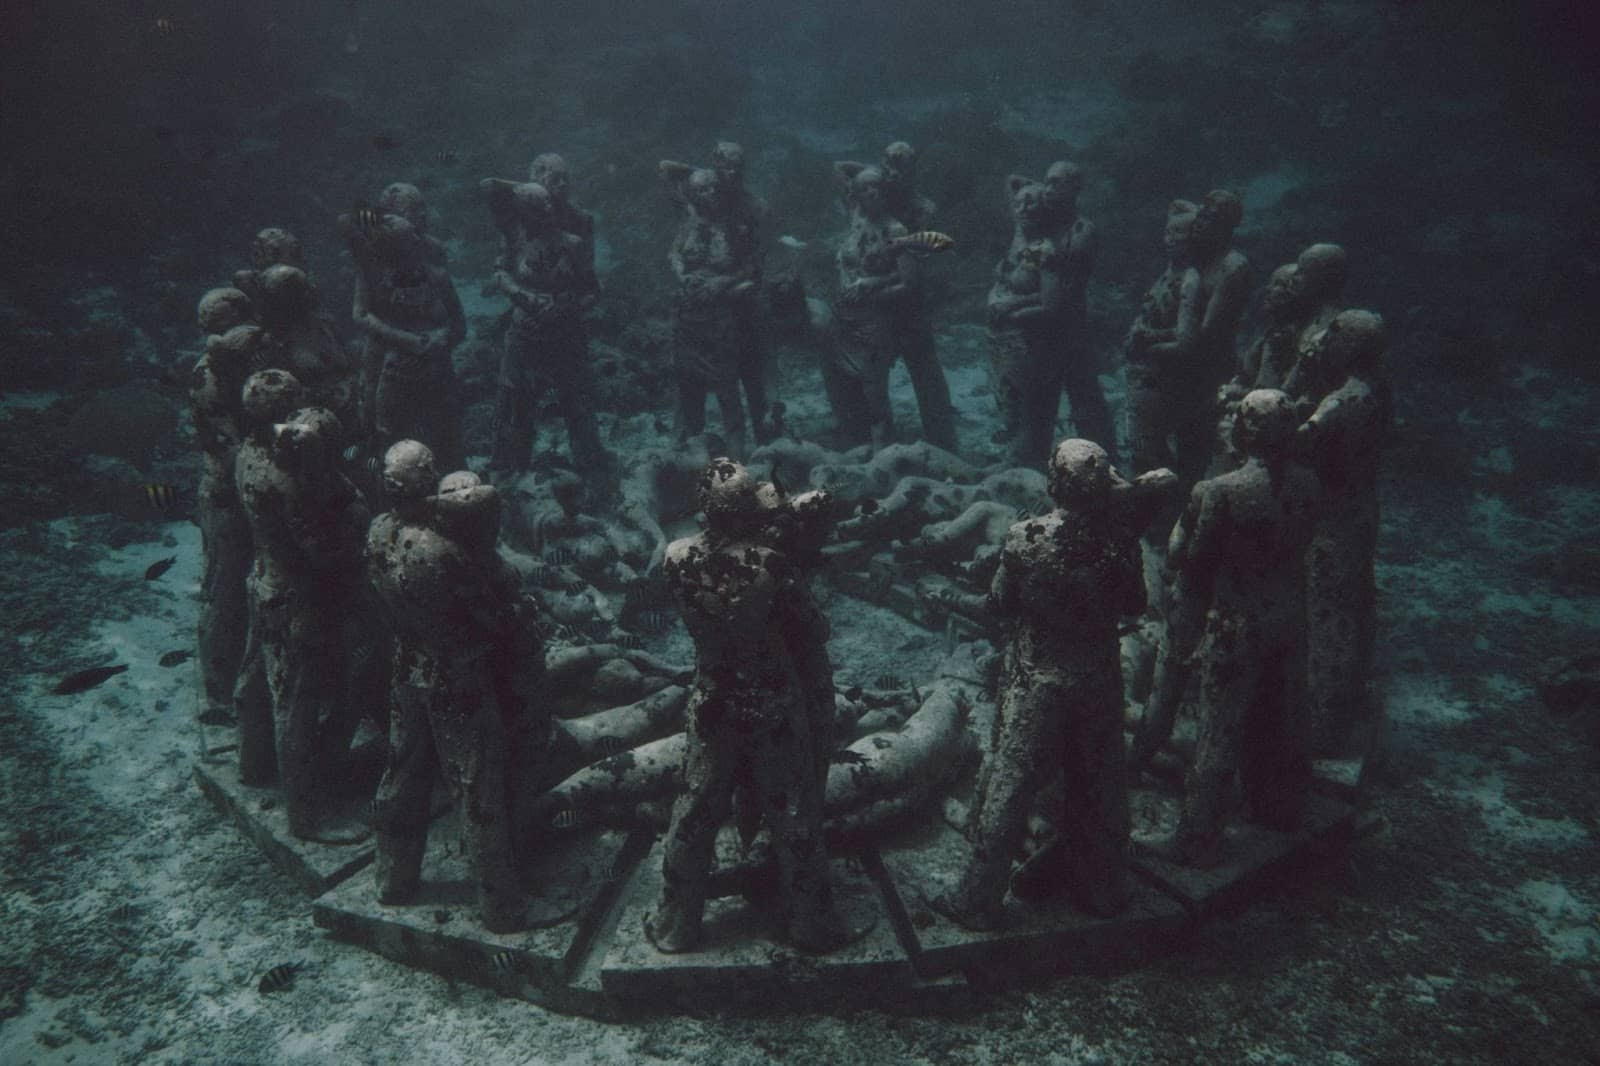 The underwater art installation by Jason Decaires Taylor.